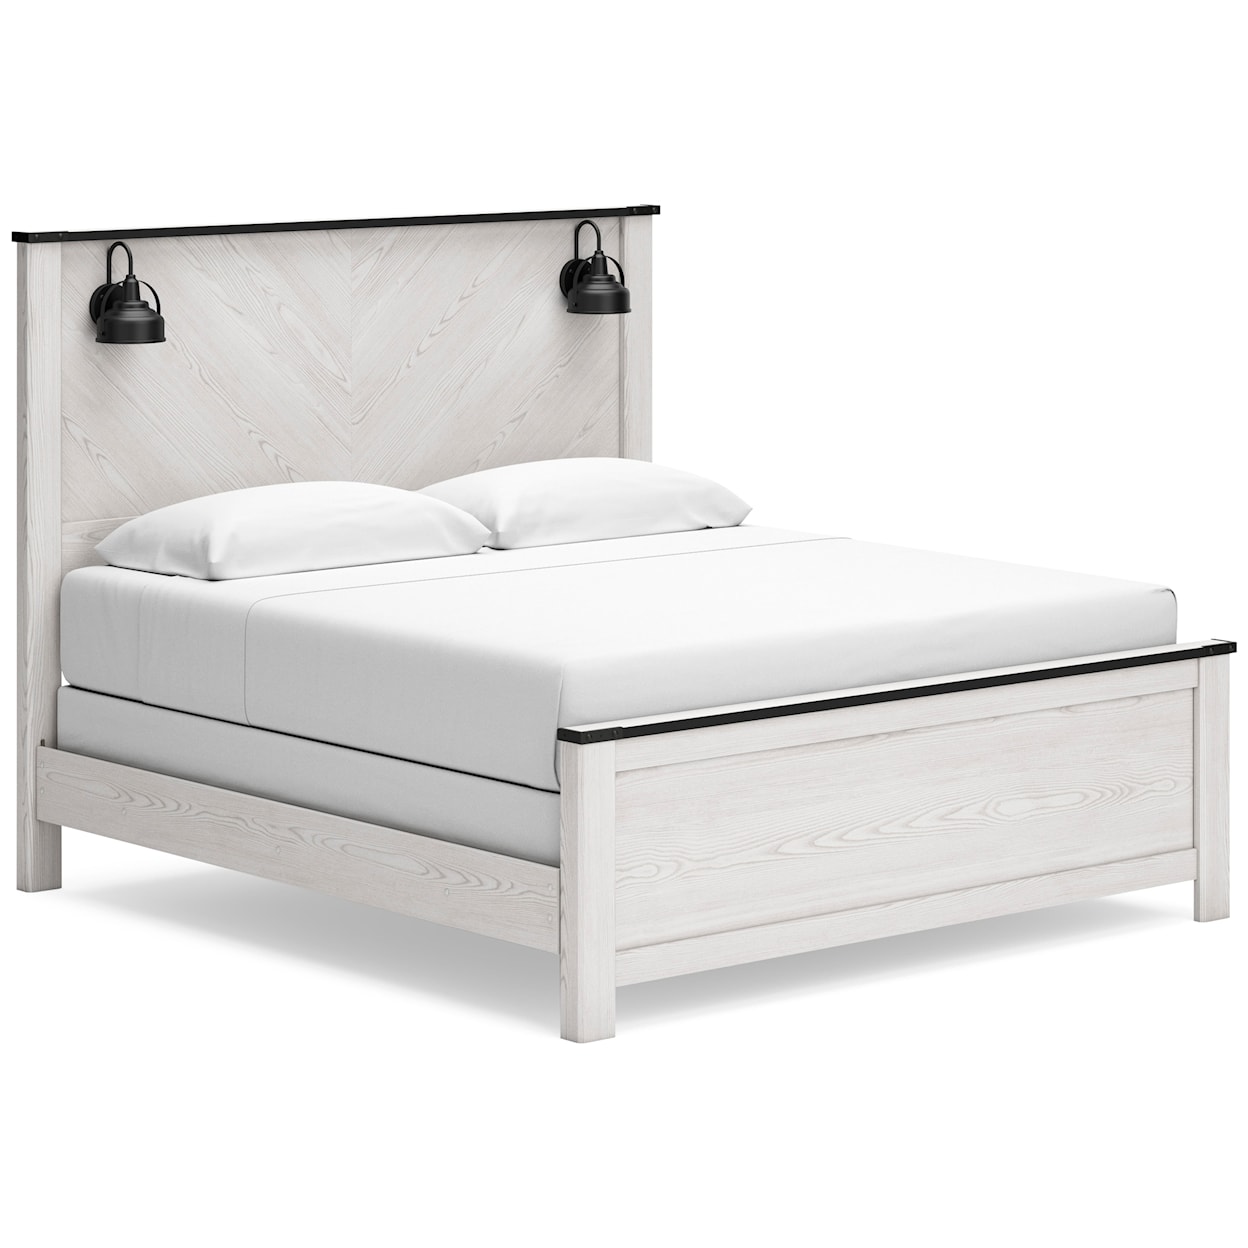 Signature Design by Ashley Schoenberg King Panel Bed